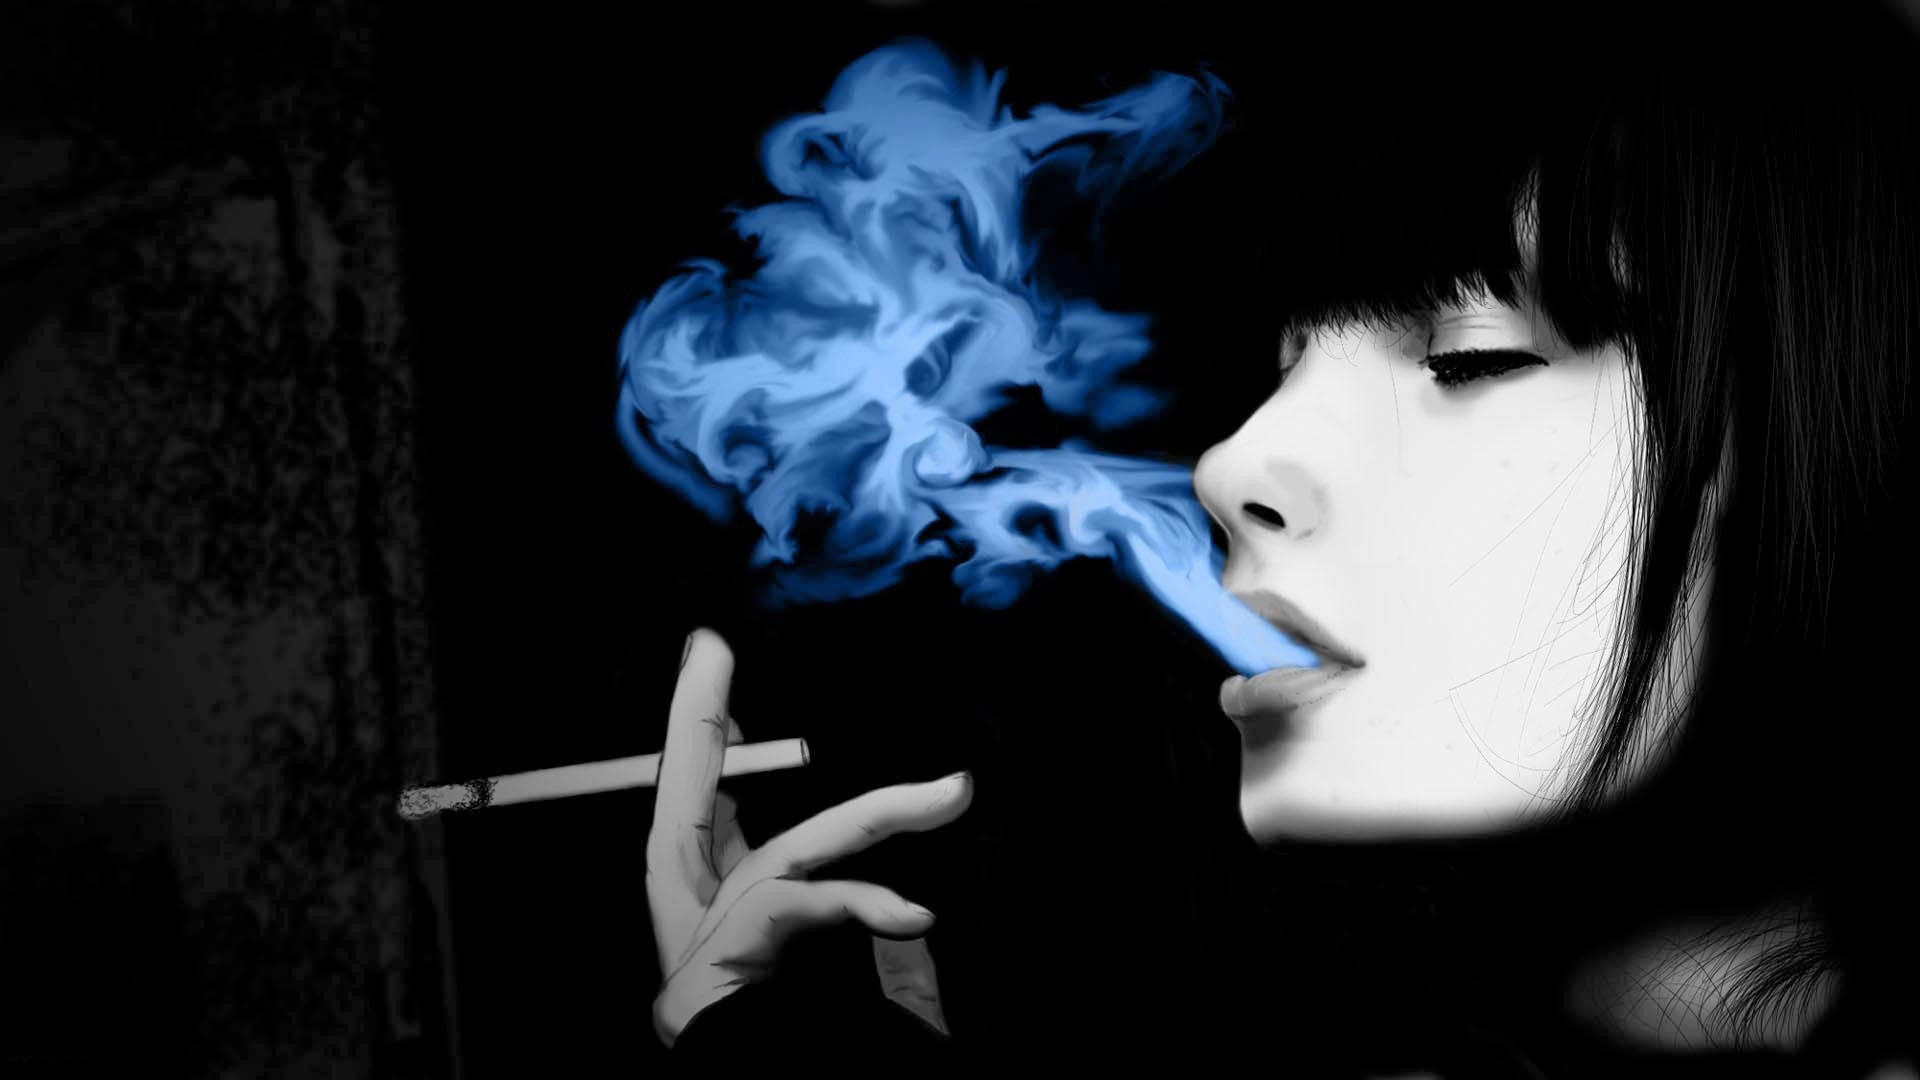 A Person's Hand Holding A Lit Cigarette With Smoke Wafting Upwards. Wallpaper